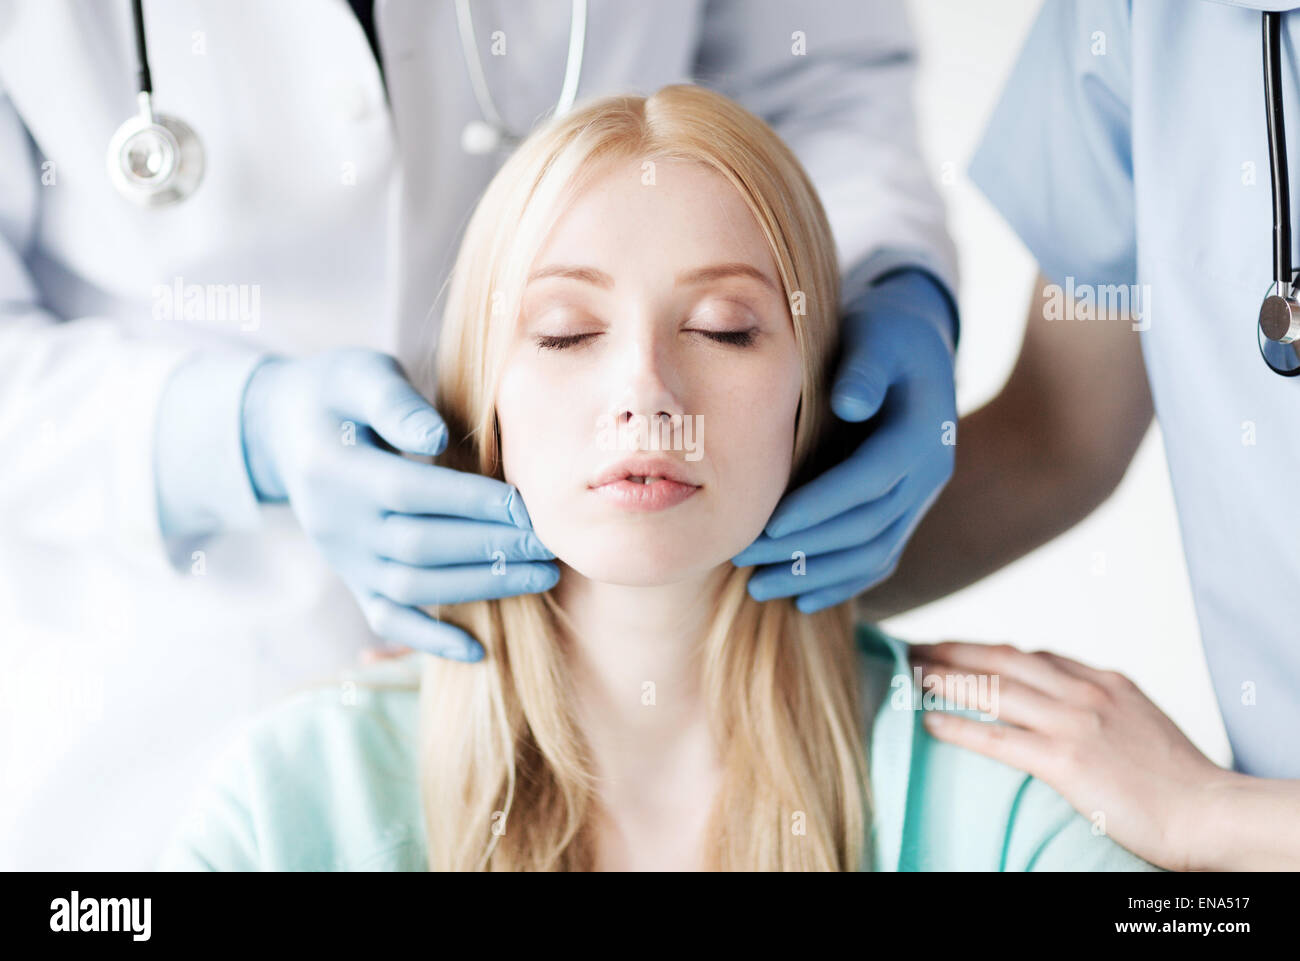 plastic surgeon or doctor with patient Stock Photo